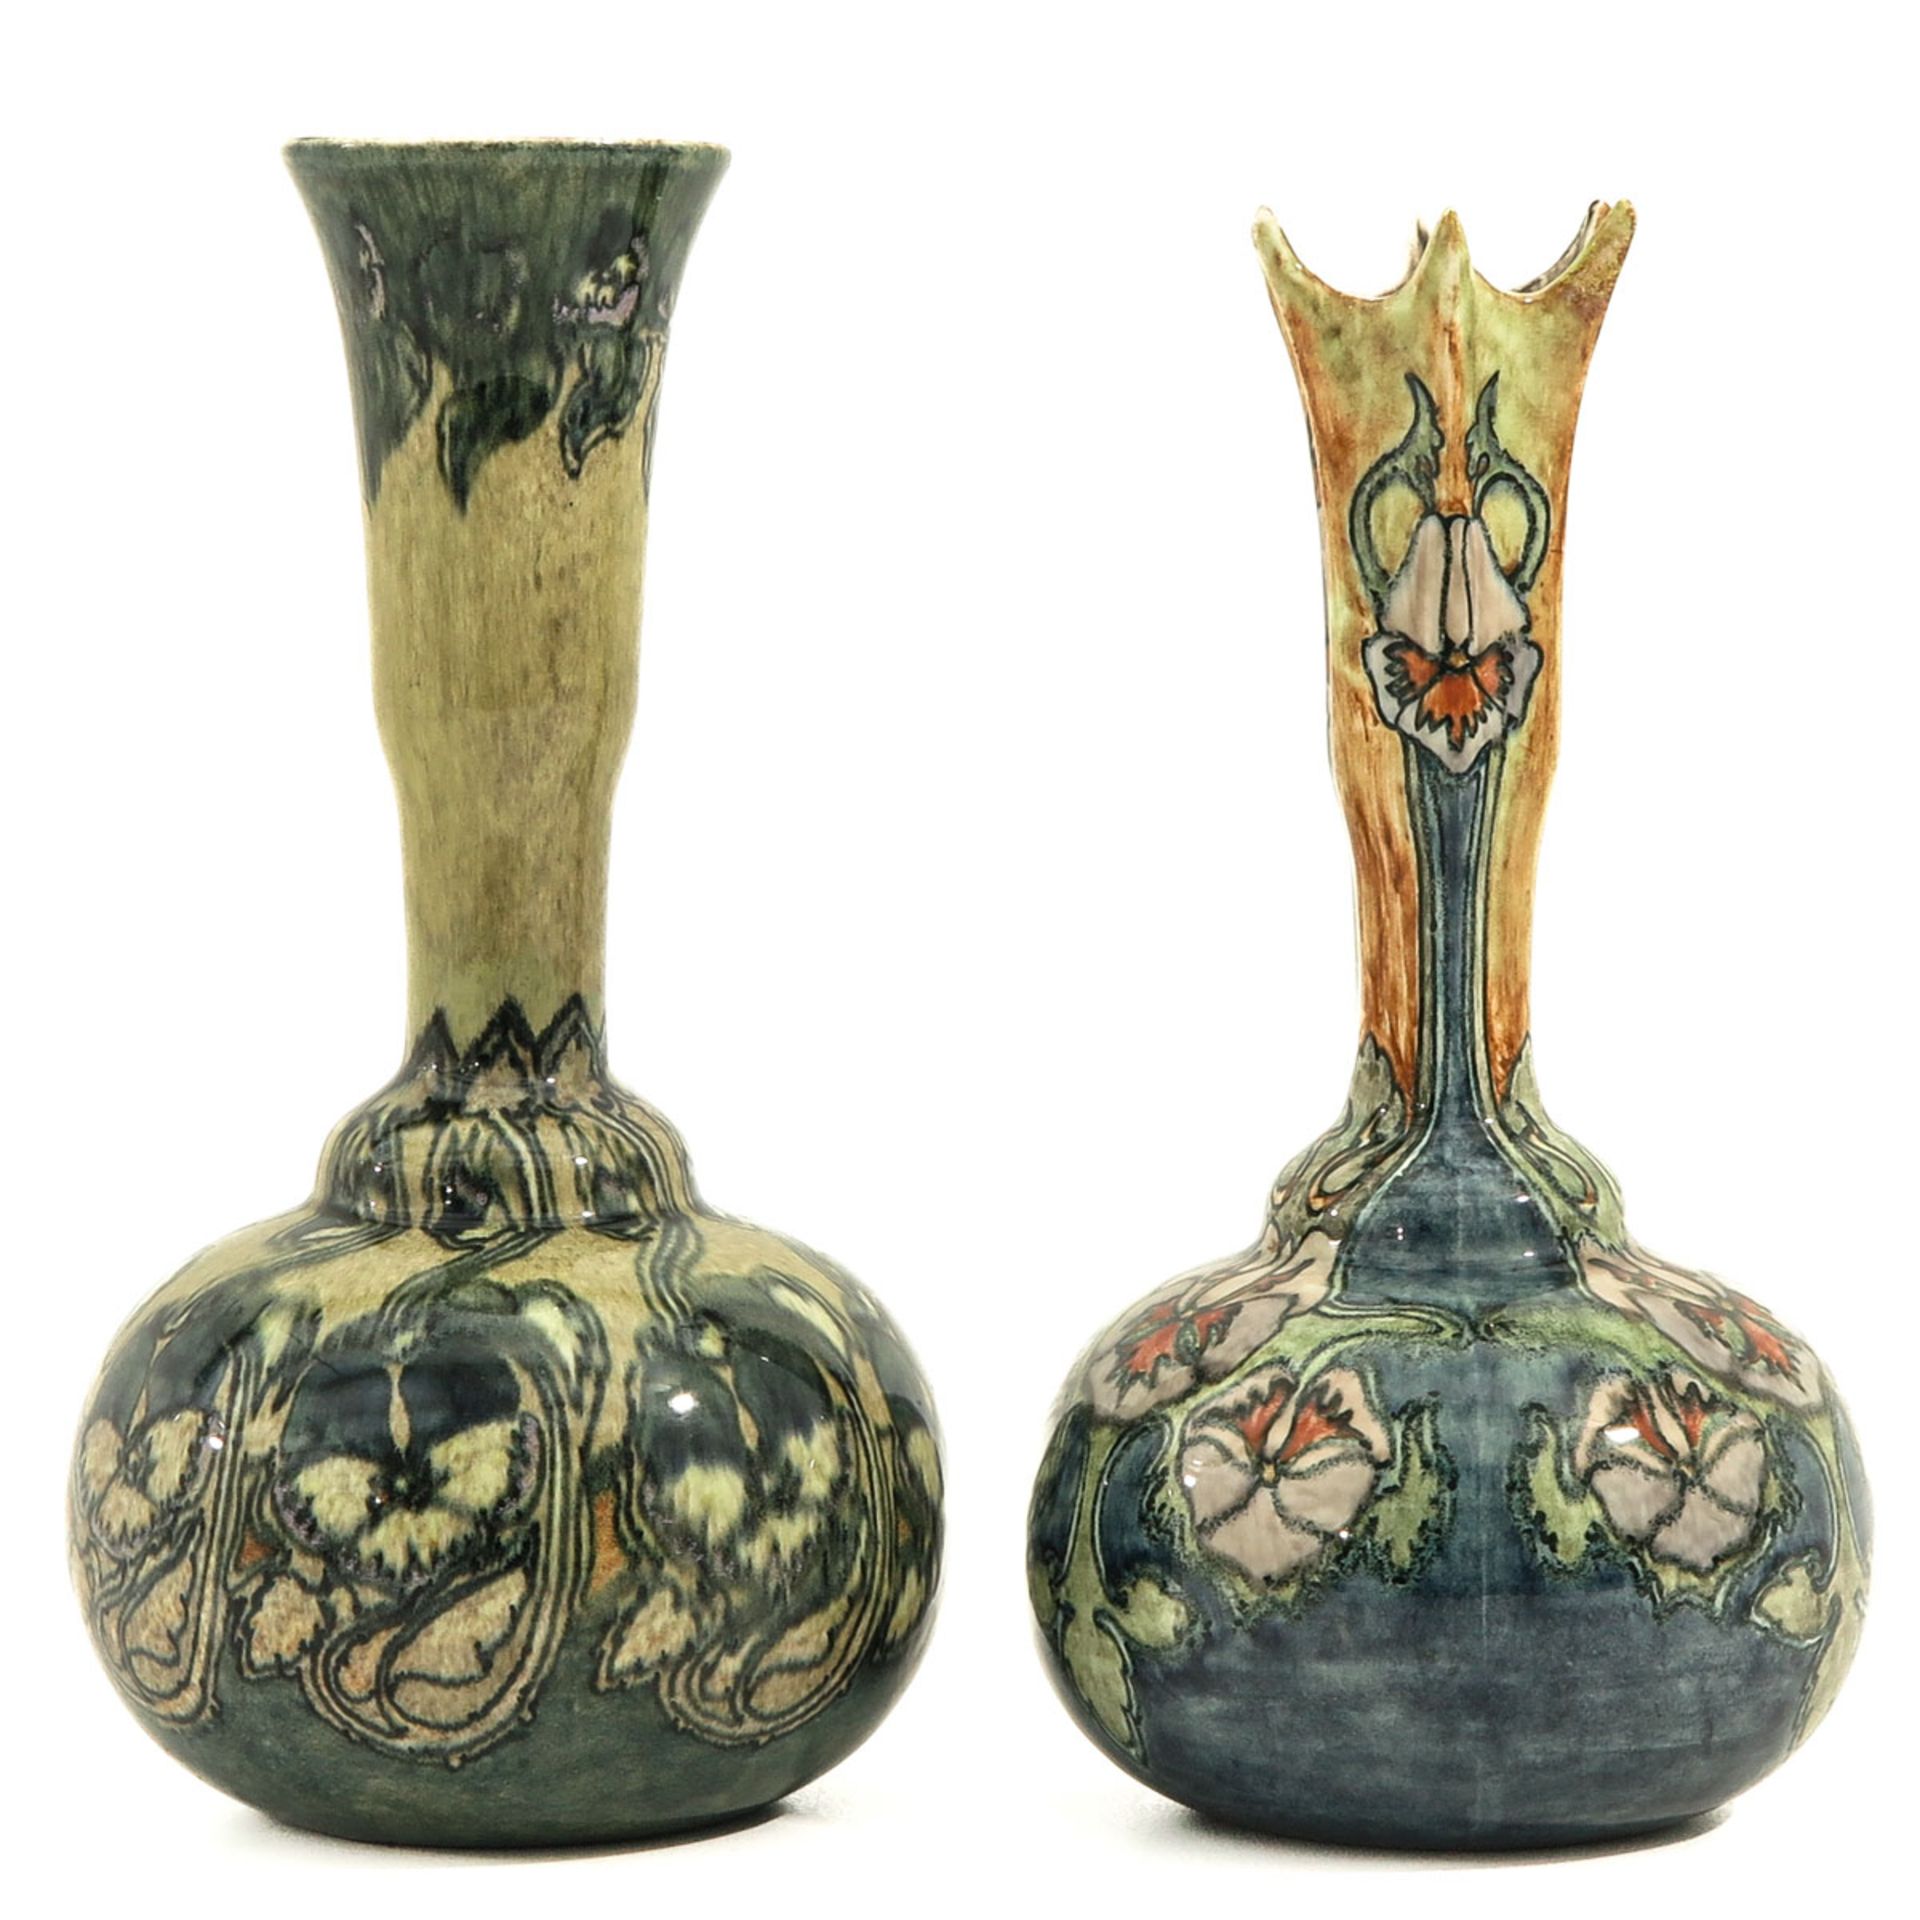 A Lot of 2 Vases - Image 3 of 10